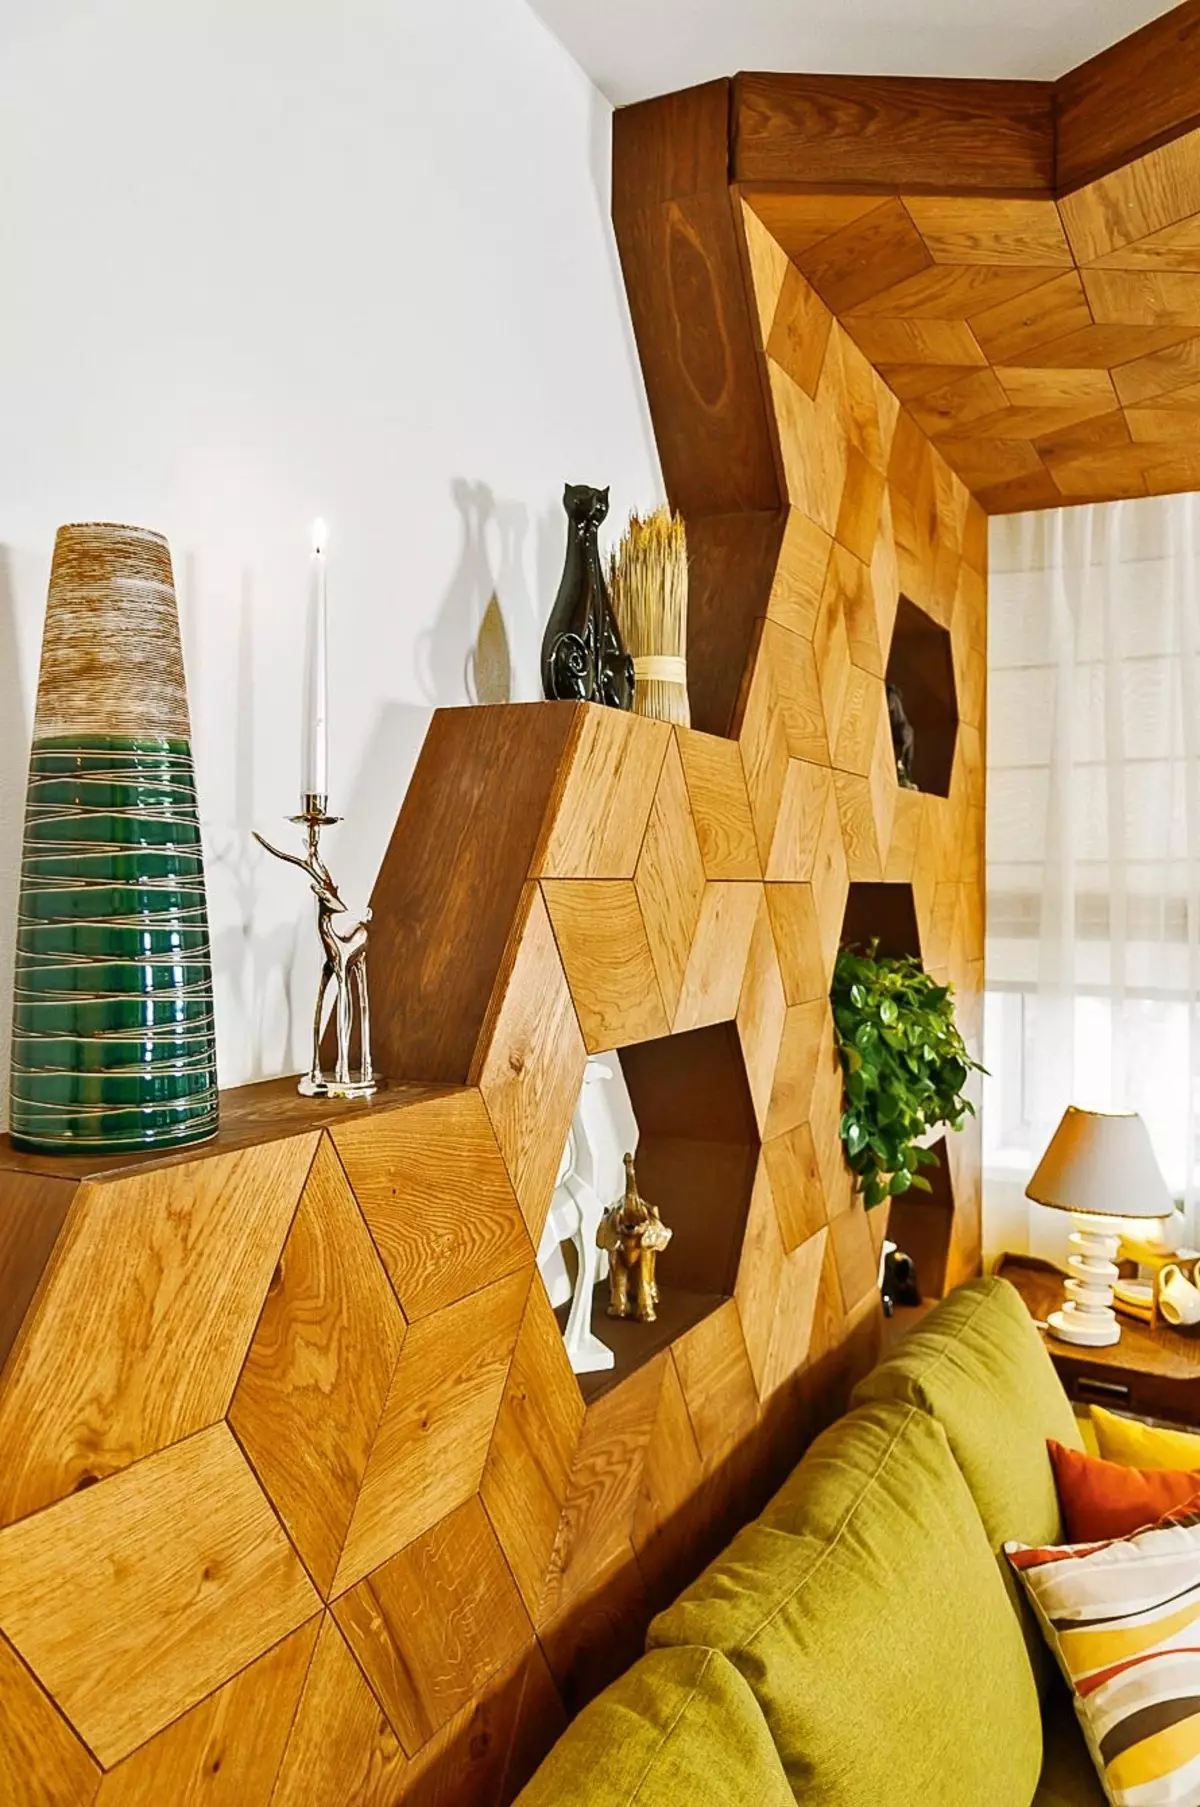 Oasis in the living room: room interior in ecostel